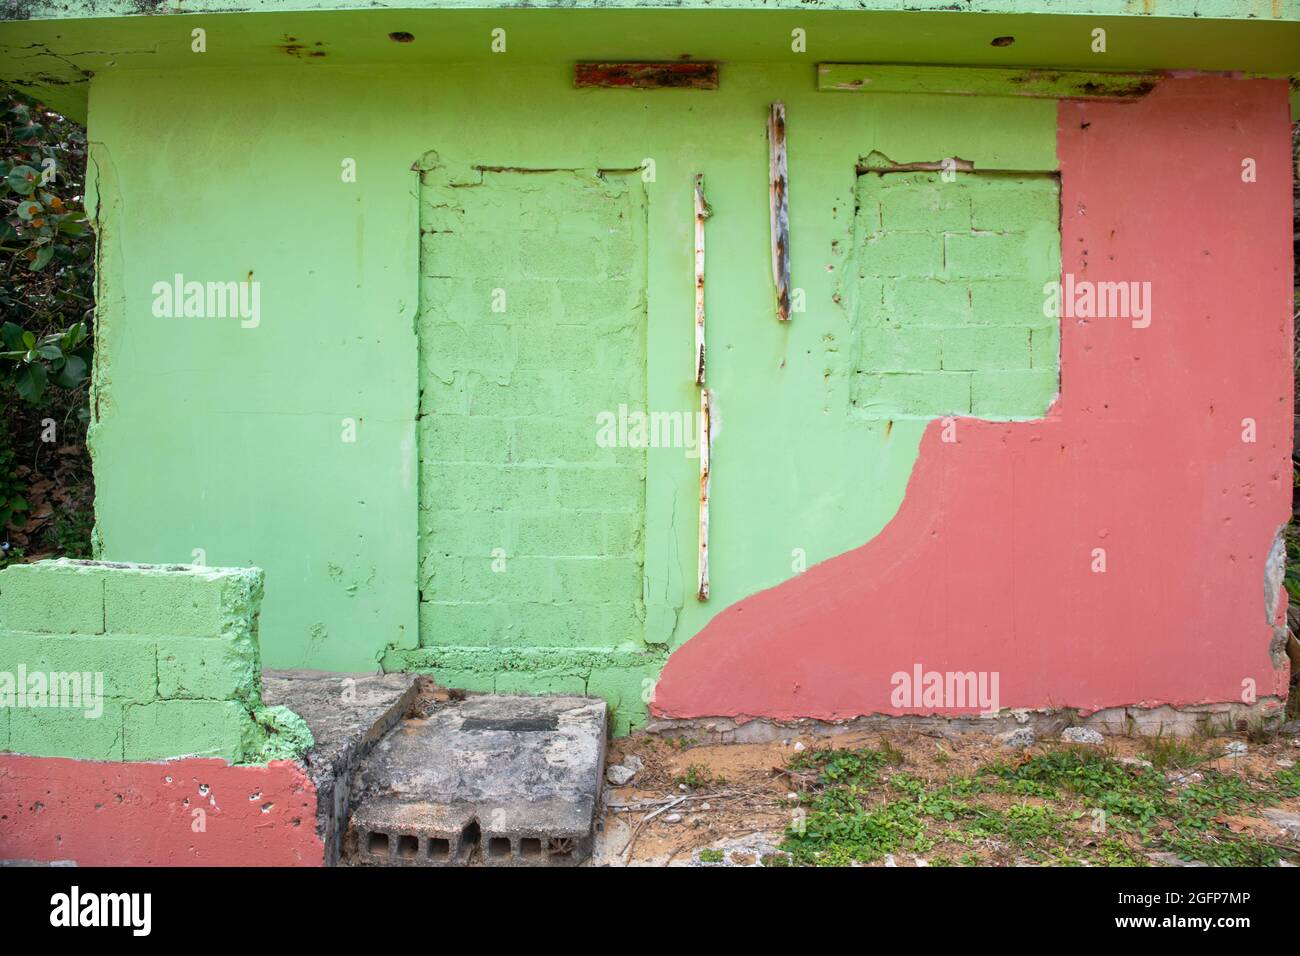 A worn down house painted in green and pink - Puerto Rico Stock Photo